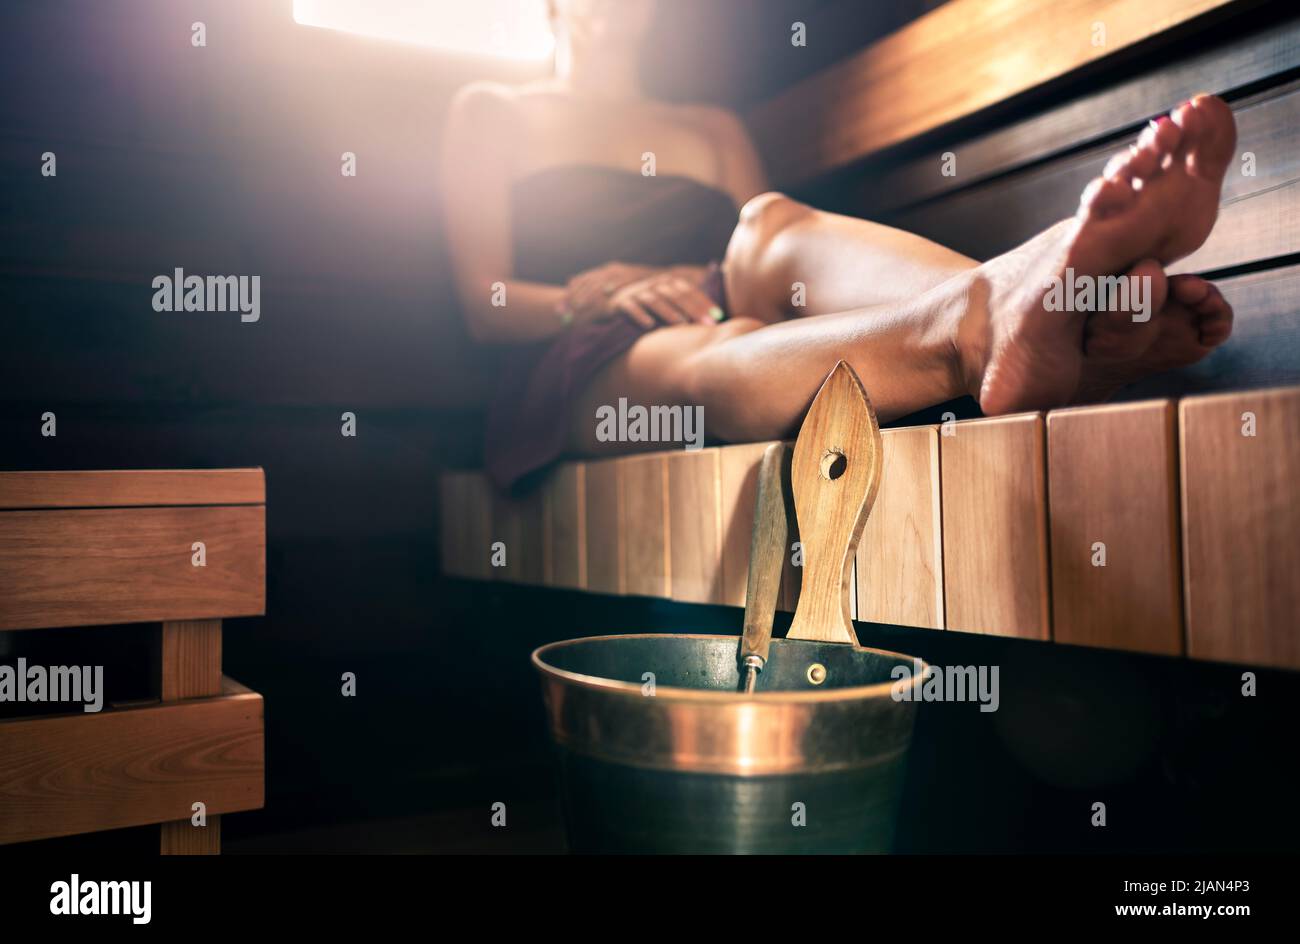 Sauna, steam room bath. Woman relaxing in spa. Wellness and warm temperature therapy in dark wood home in Finland. Water bucket and ladle. Stock Photo